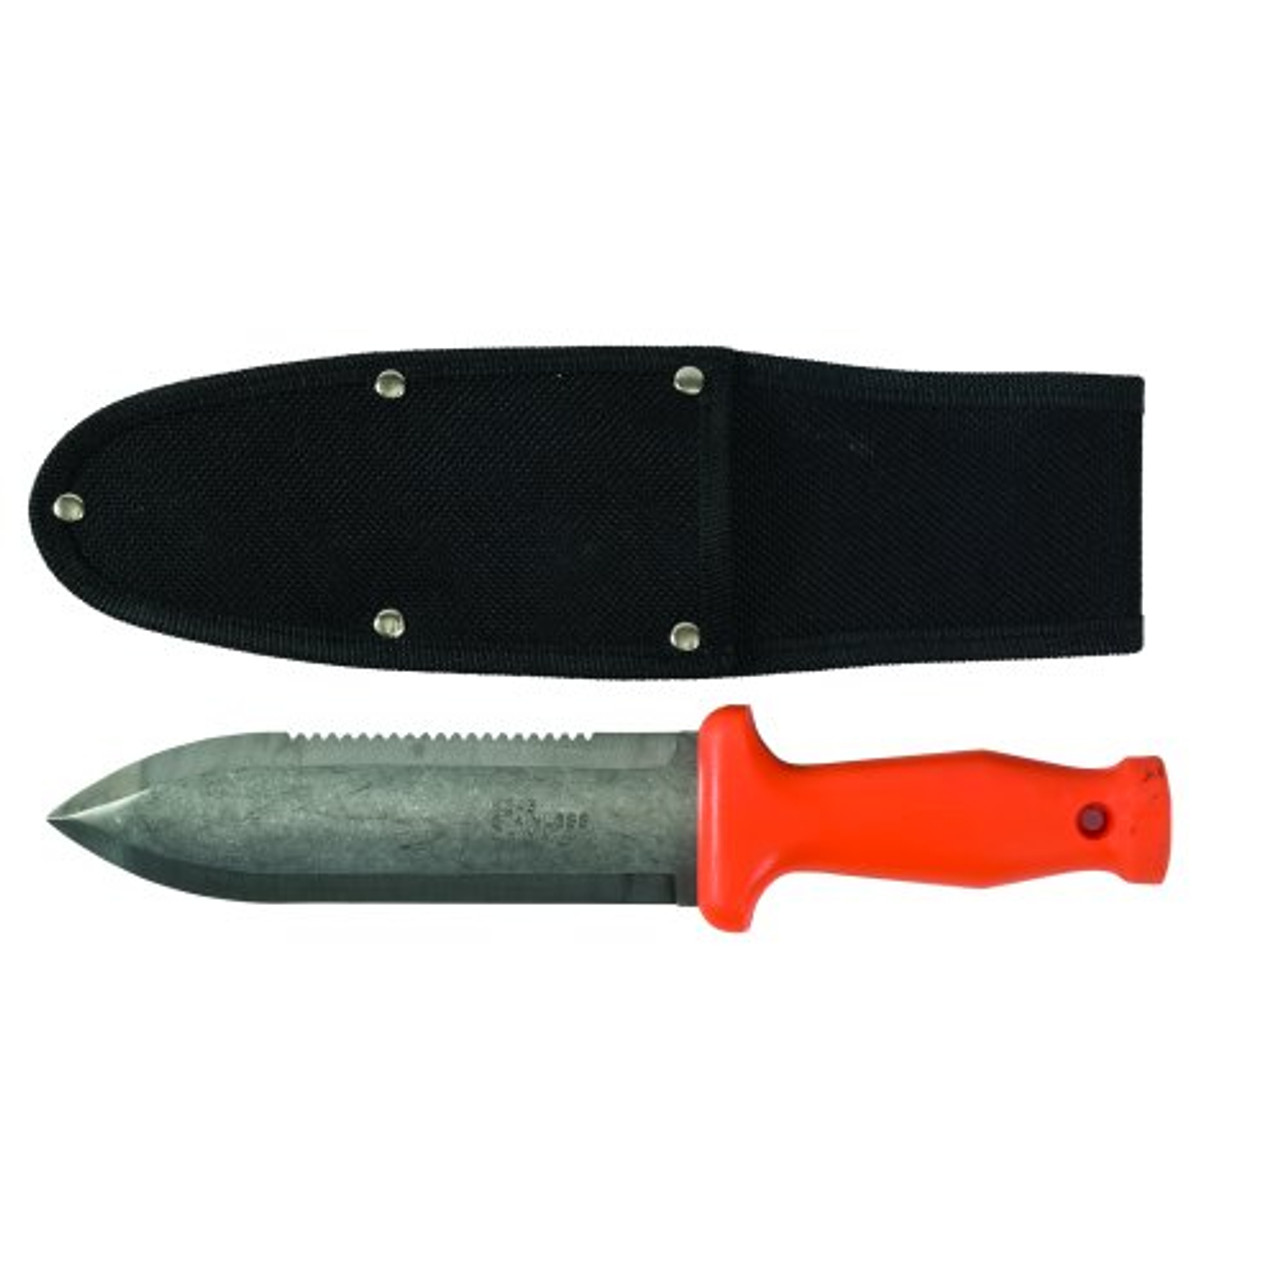 Seymour Midwest Landscaper Digging/Weeding Knife with Sheath 41042